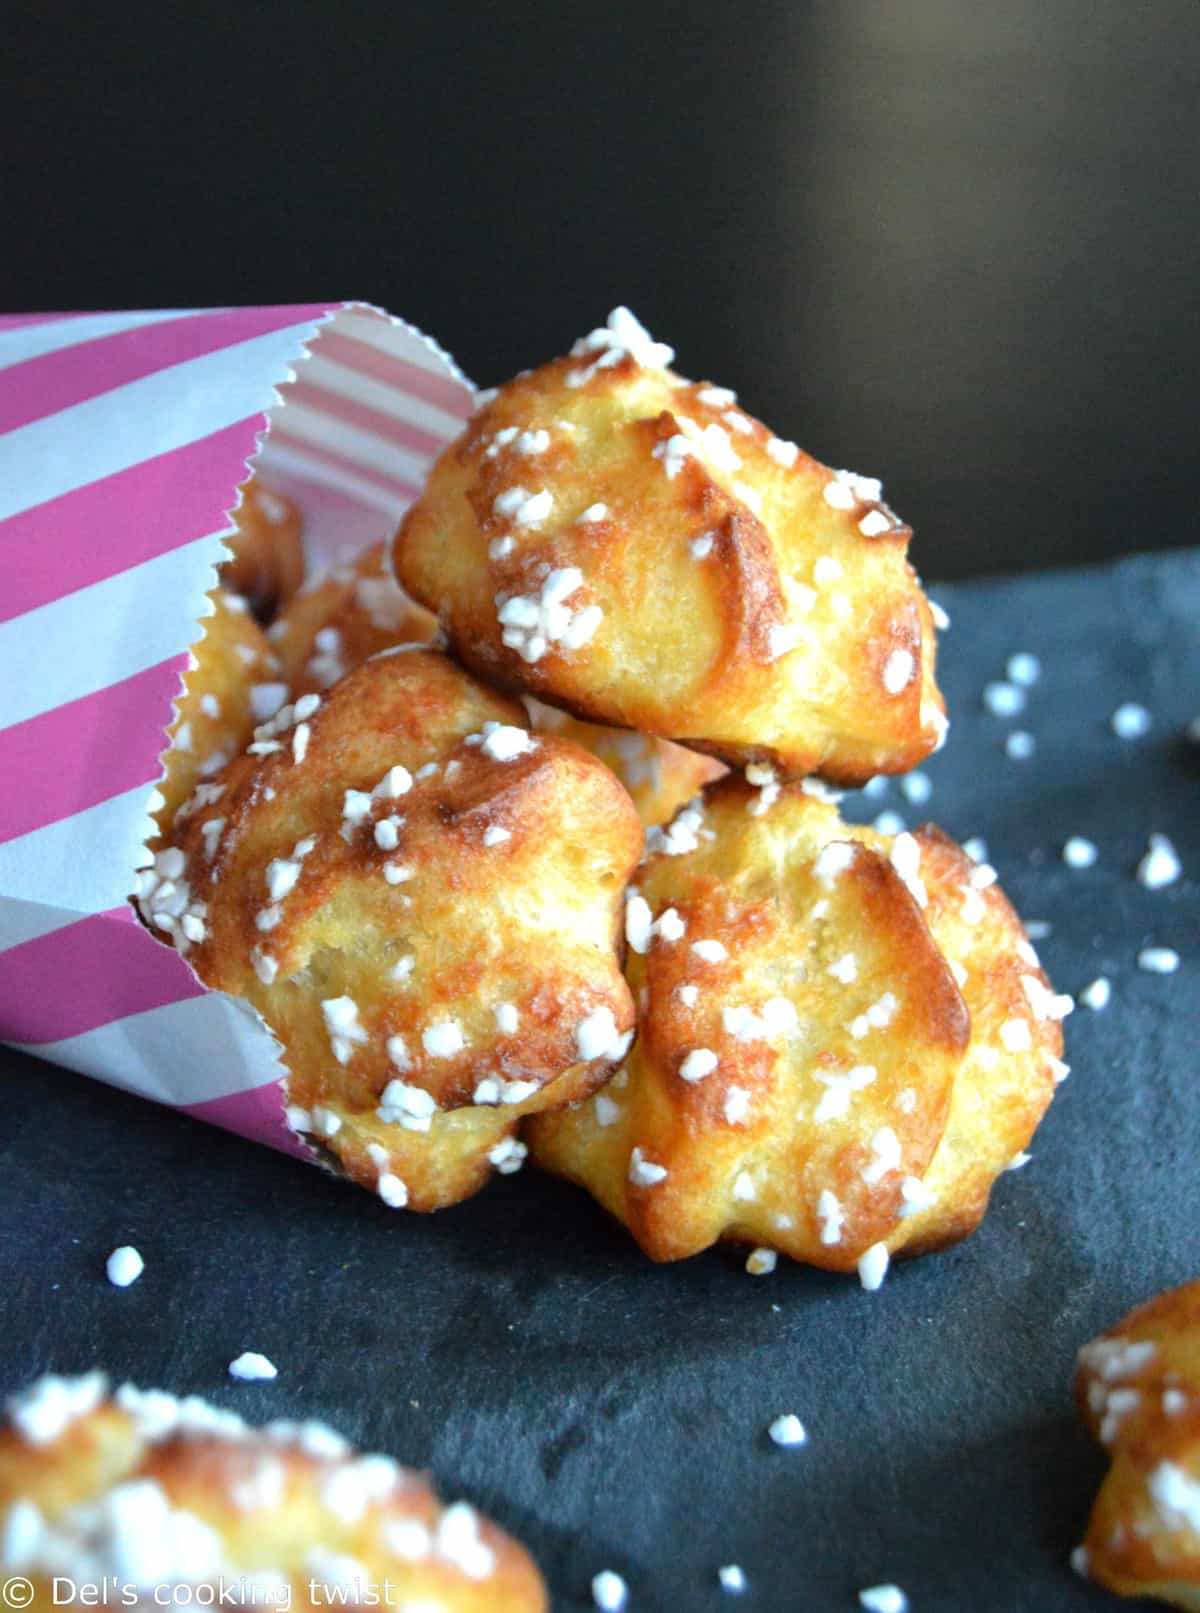 French Petits Choux "Chouquettes"